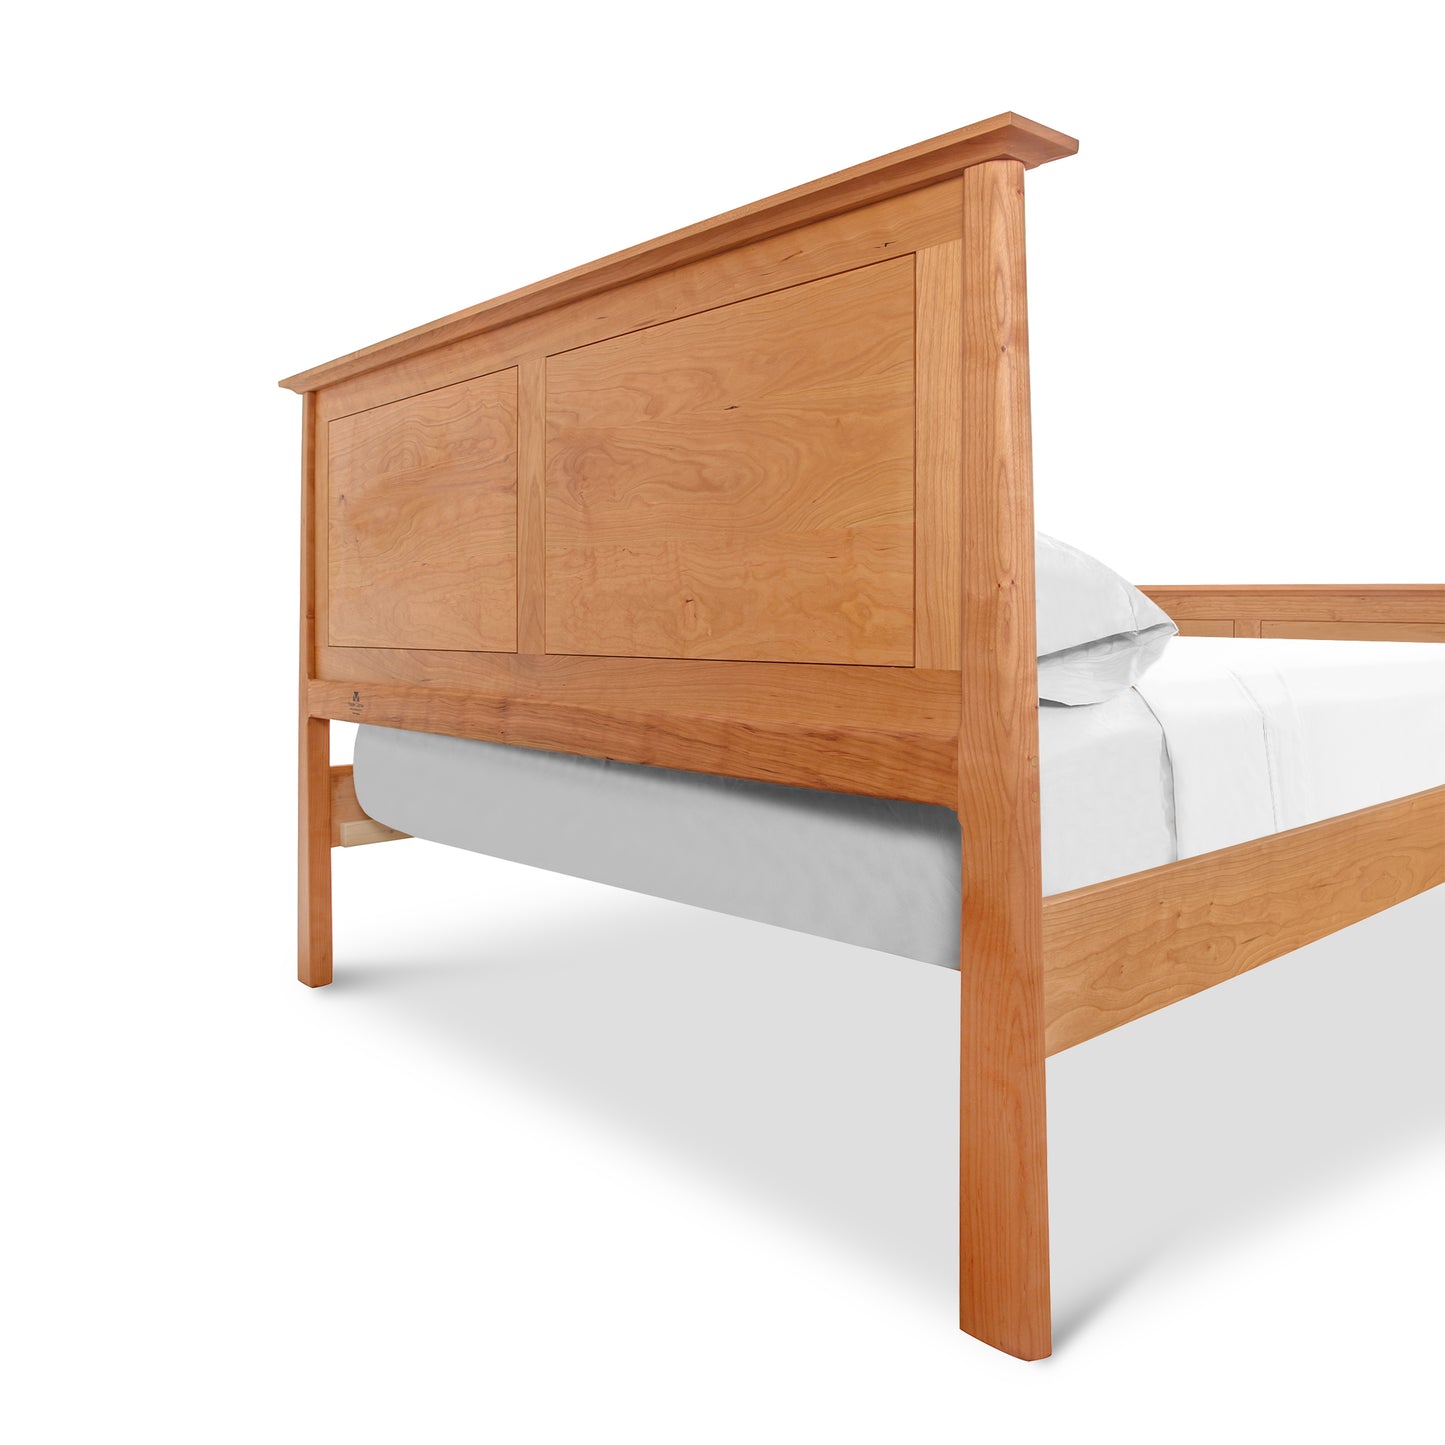 A Cherry Moon Panel Bed from Maple Corner Woodworks with a high rectangular headboard, showcasing a smooth finish and visible wood grain. The bed is partially dressed with a plain gray fitted sheet, set against a natural cherry background.